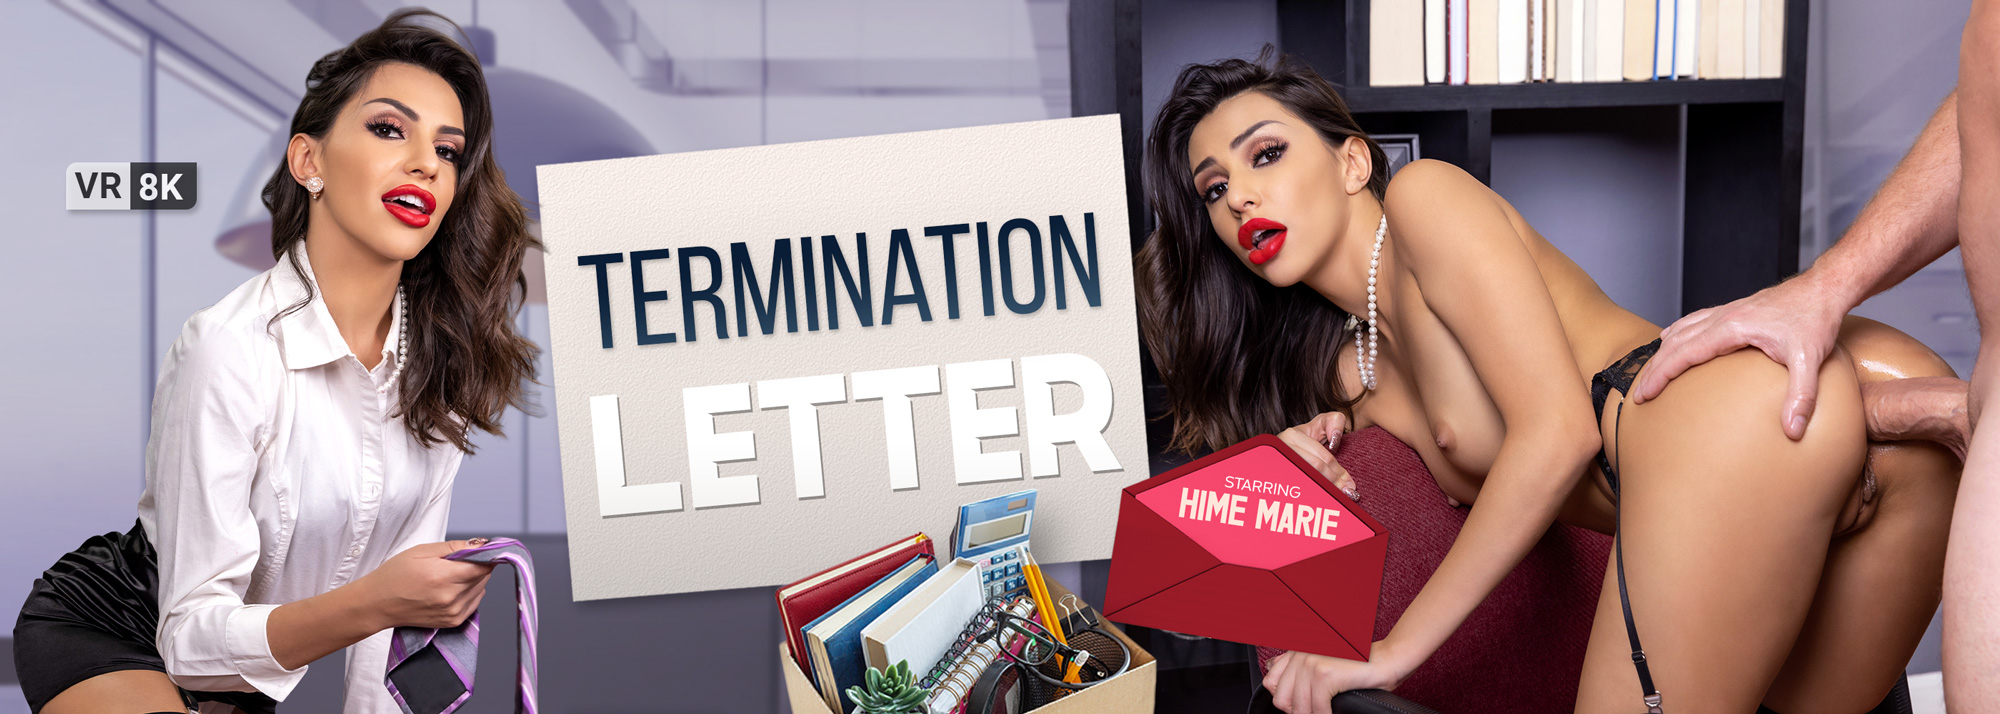 Termination Letter with Hime Marie  Slideshow